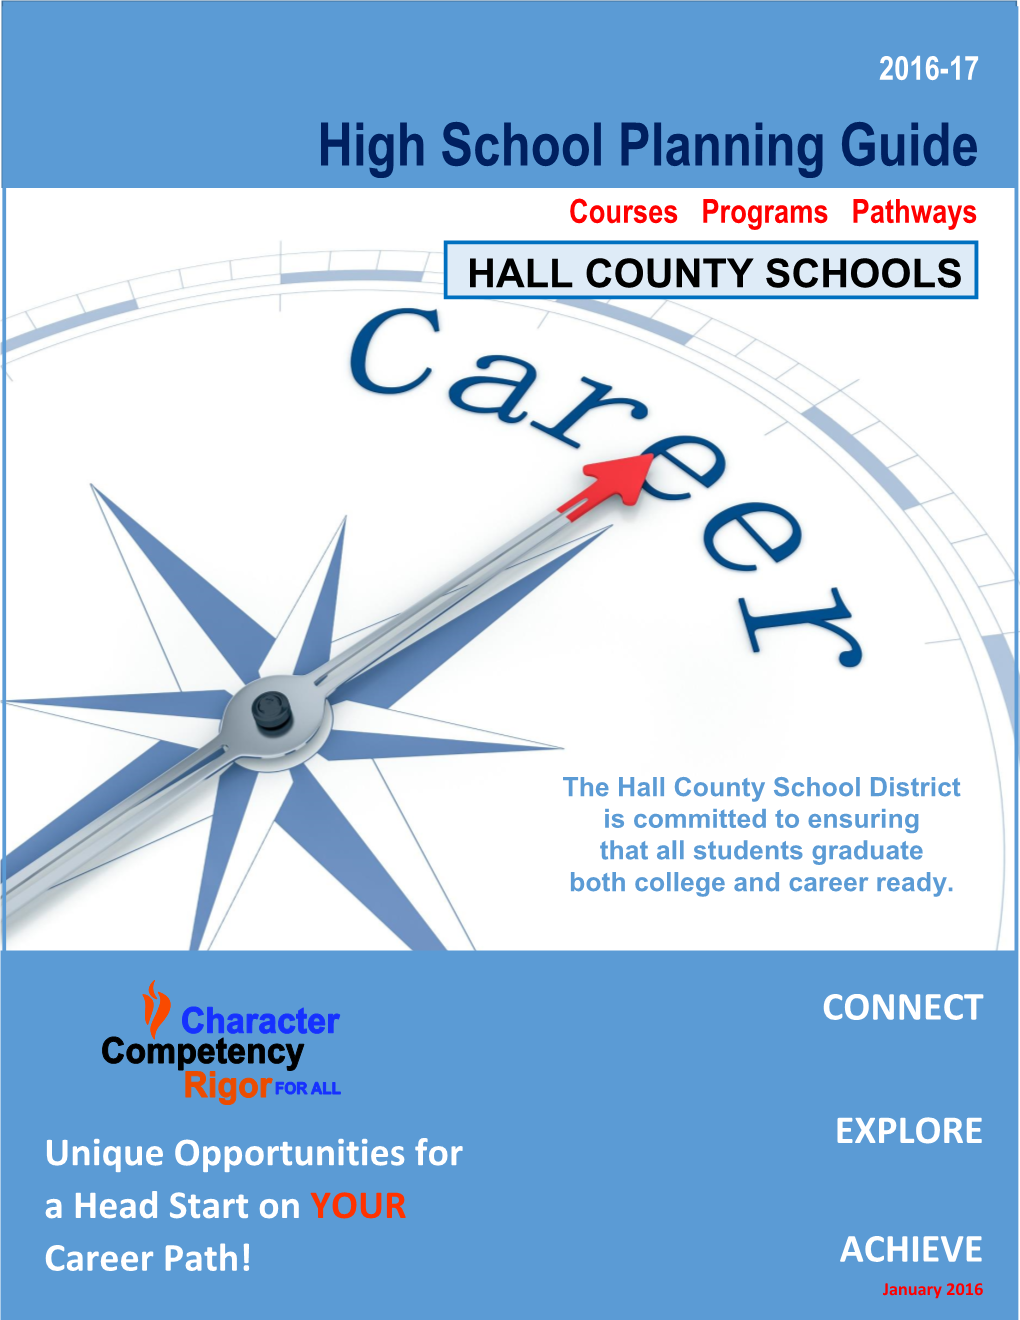 High School Planning Guide Courses Programs Pathways HALL COUNTY SCHOOLS